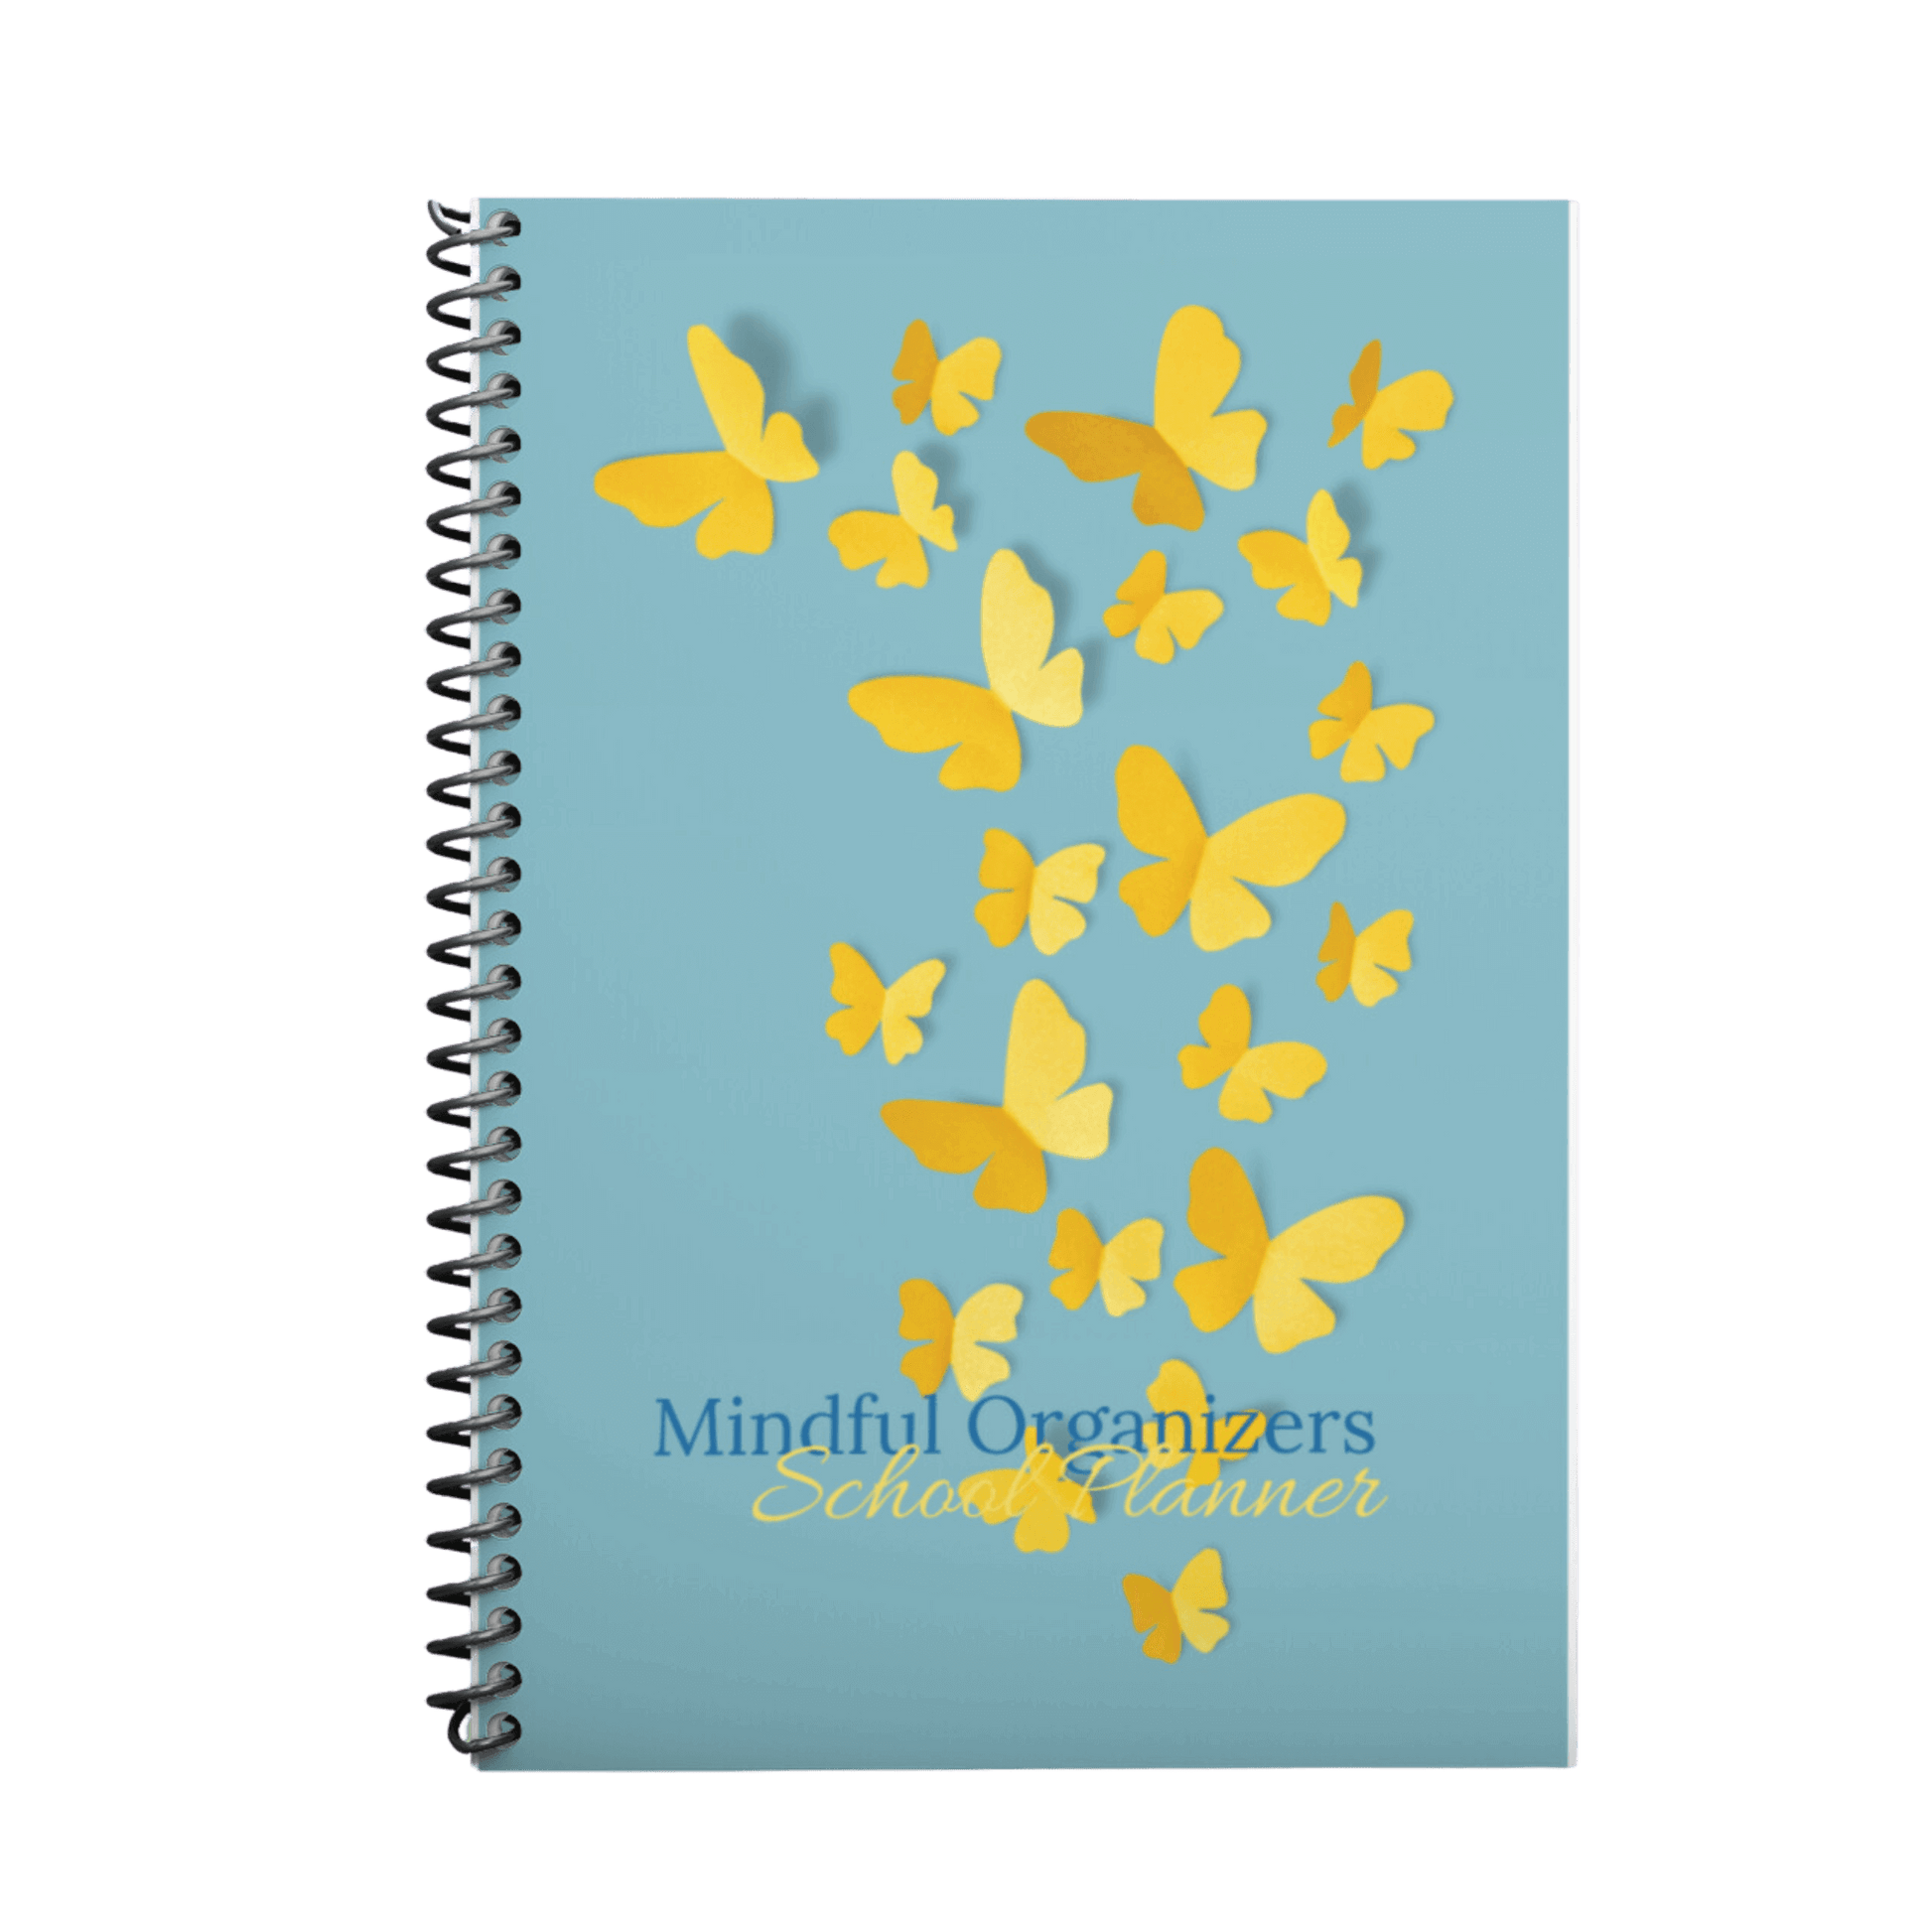 Image of Mindful Organizers School Planner from Mindful Organizers selling for $22.00